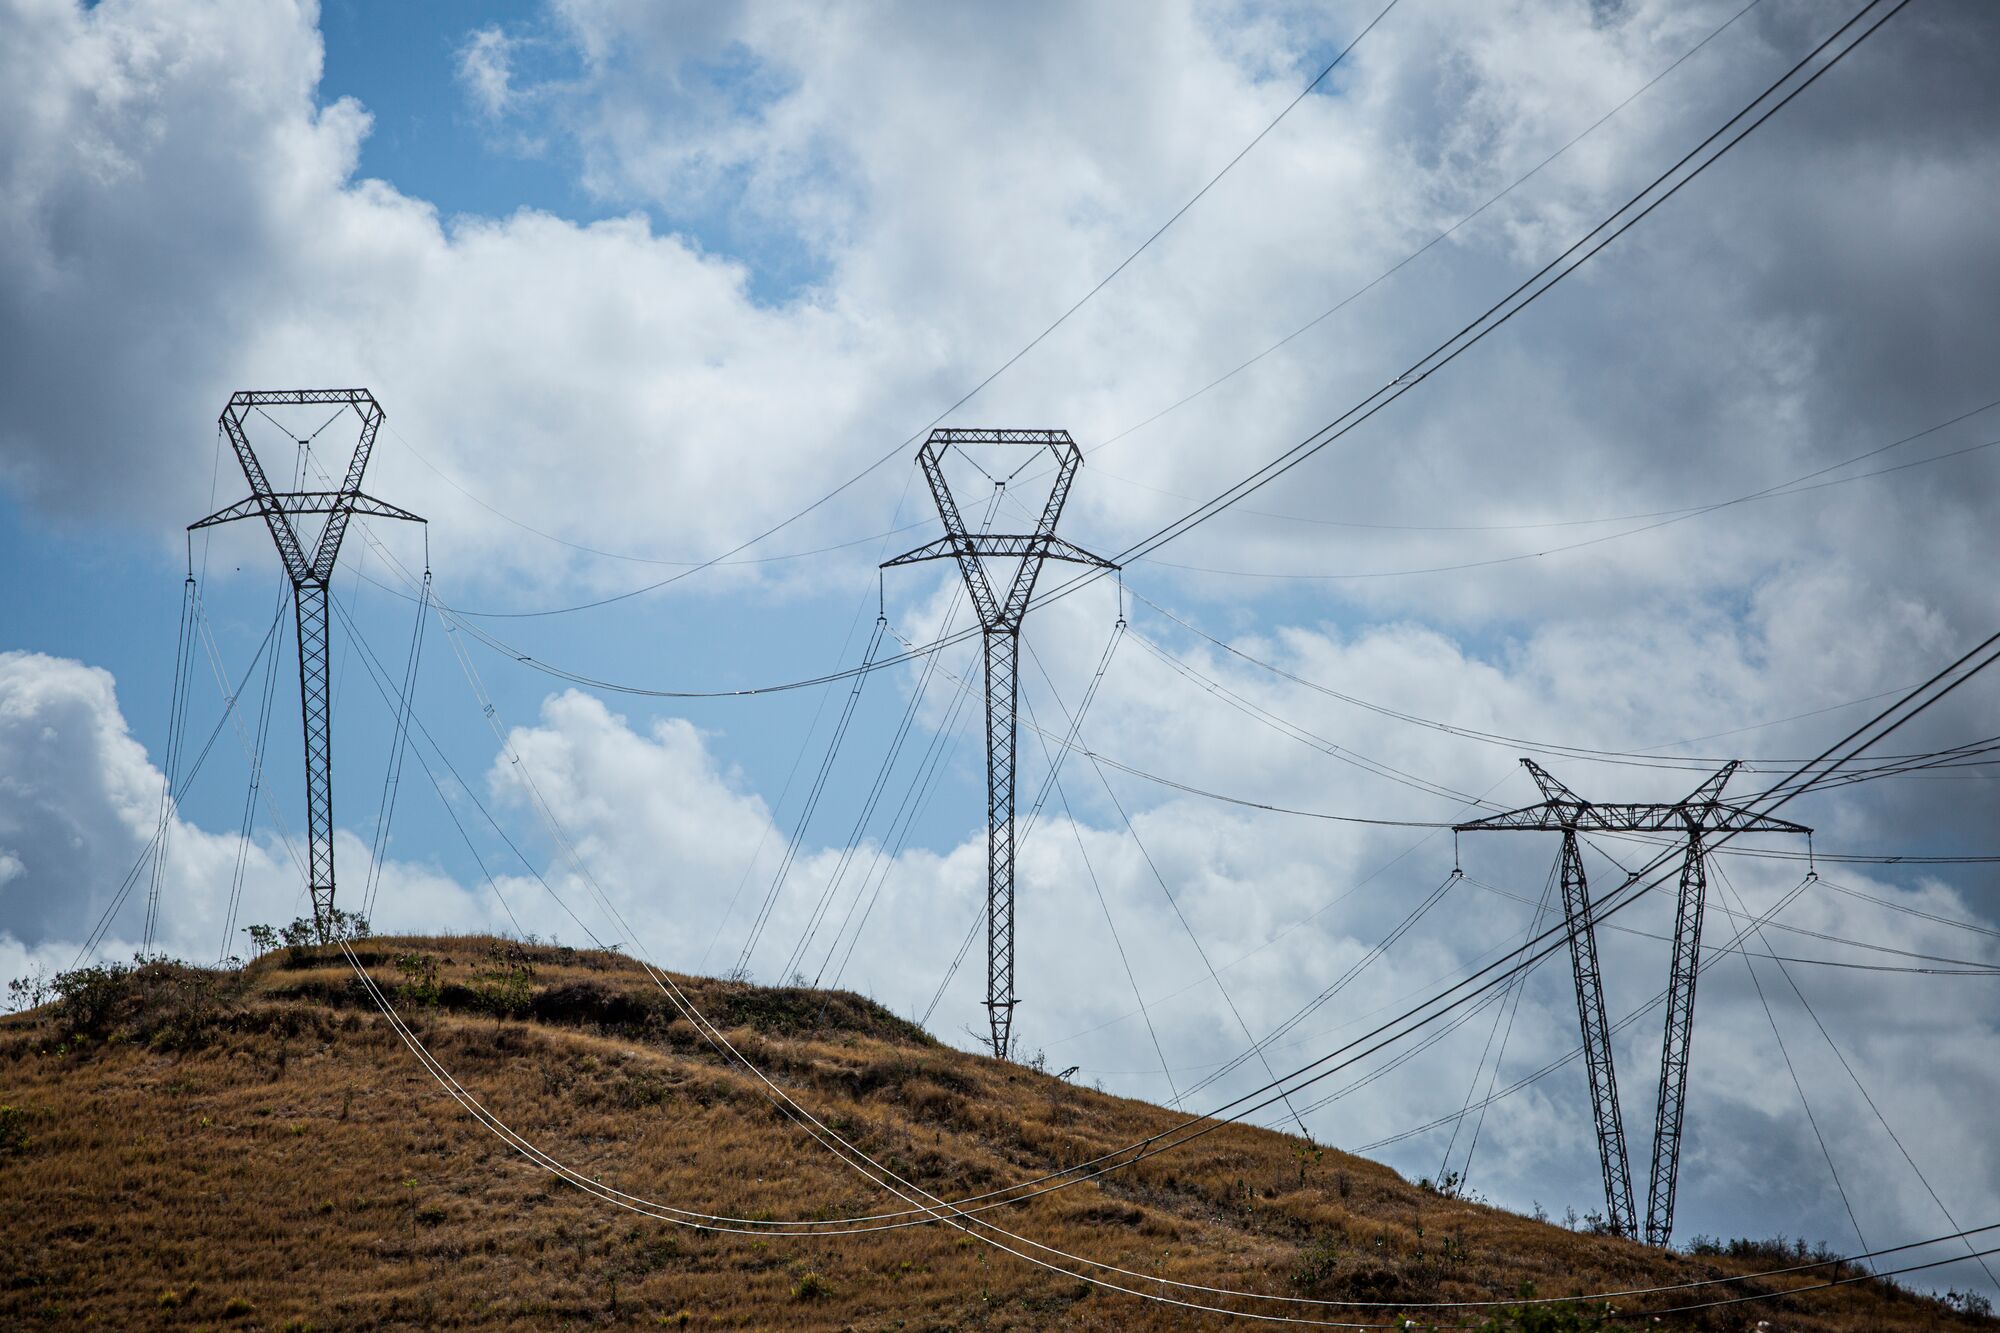 Transmission powerlines in Guayama, P.R. (Erika P. Rodríguez for Earthjustice)